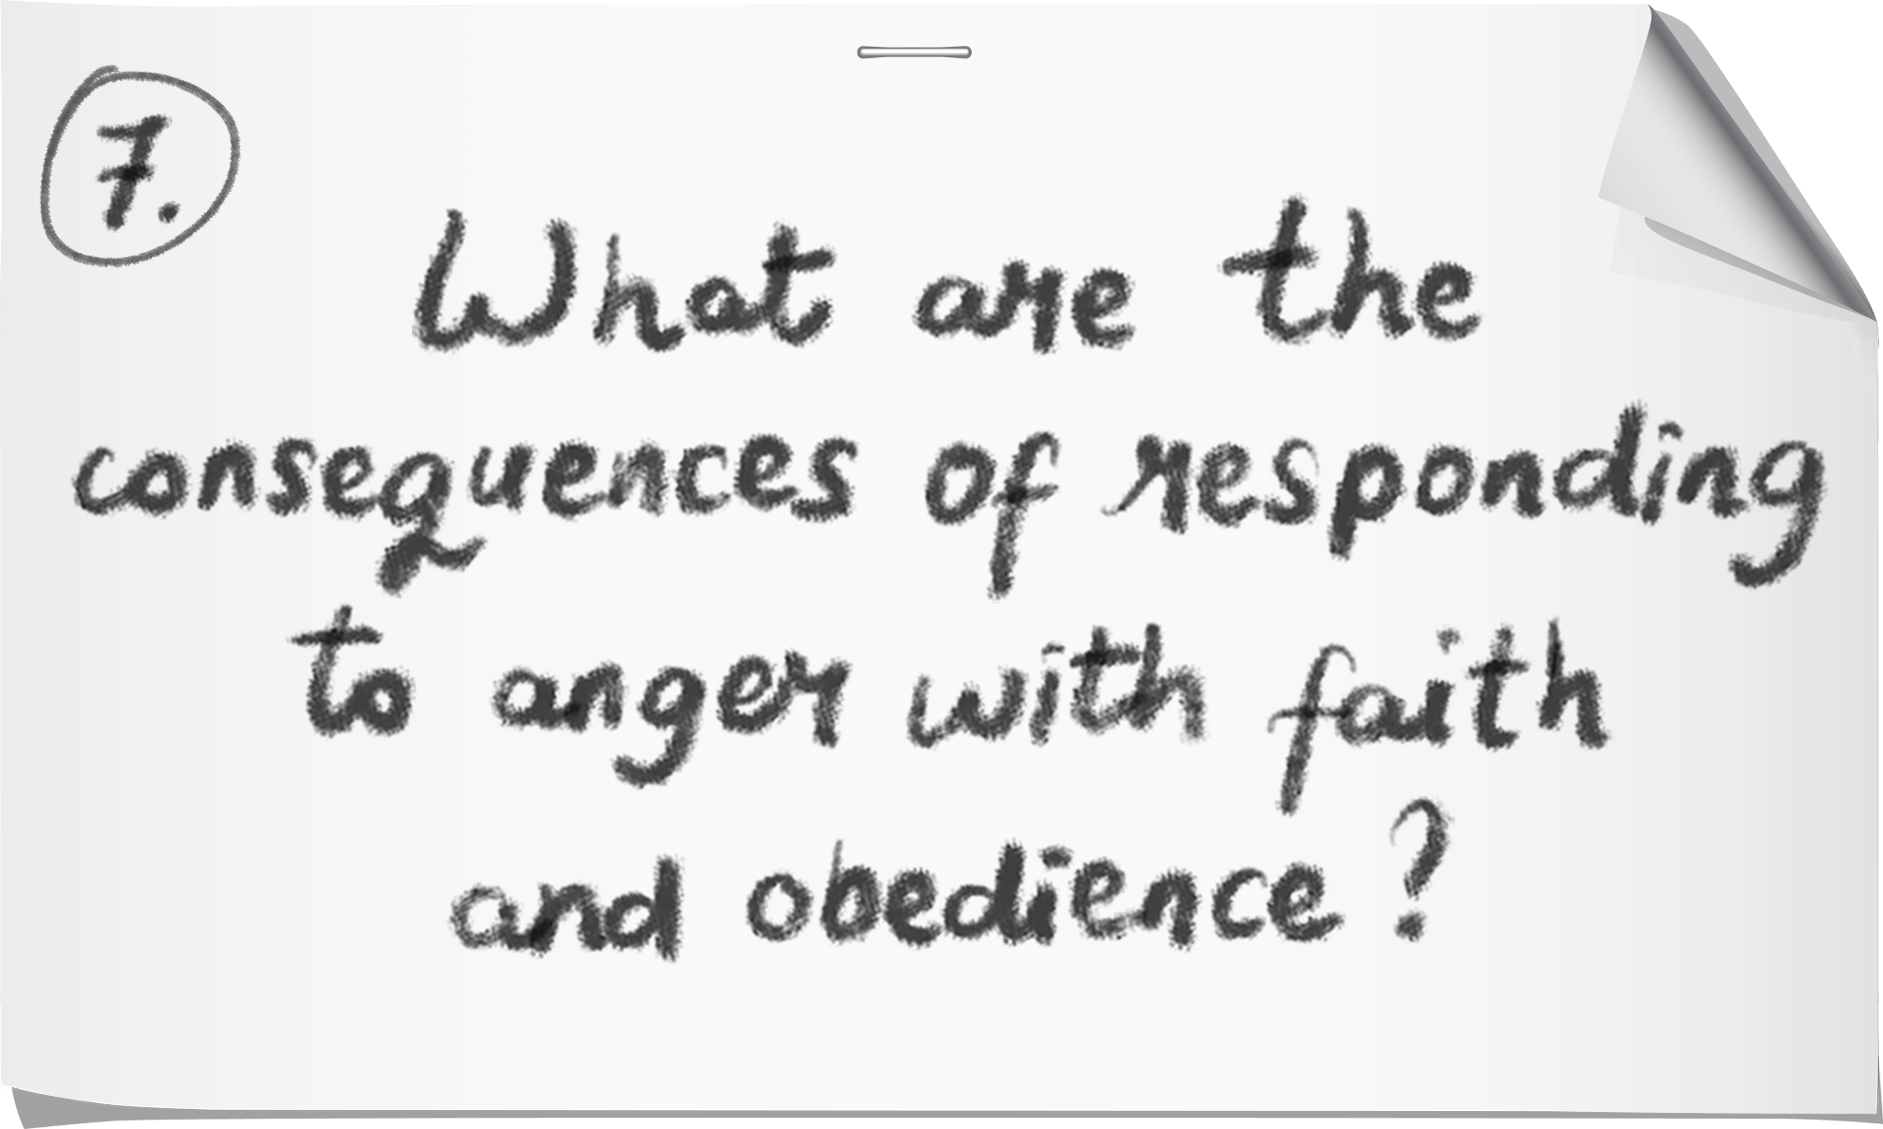 What are the consequences of responding to anger with faith and obedience?